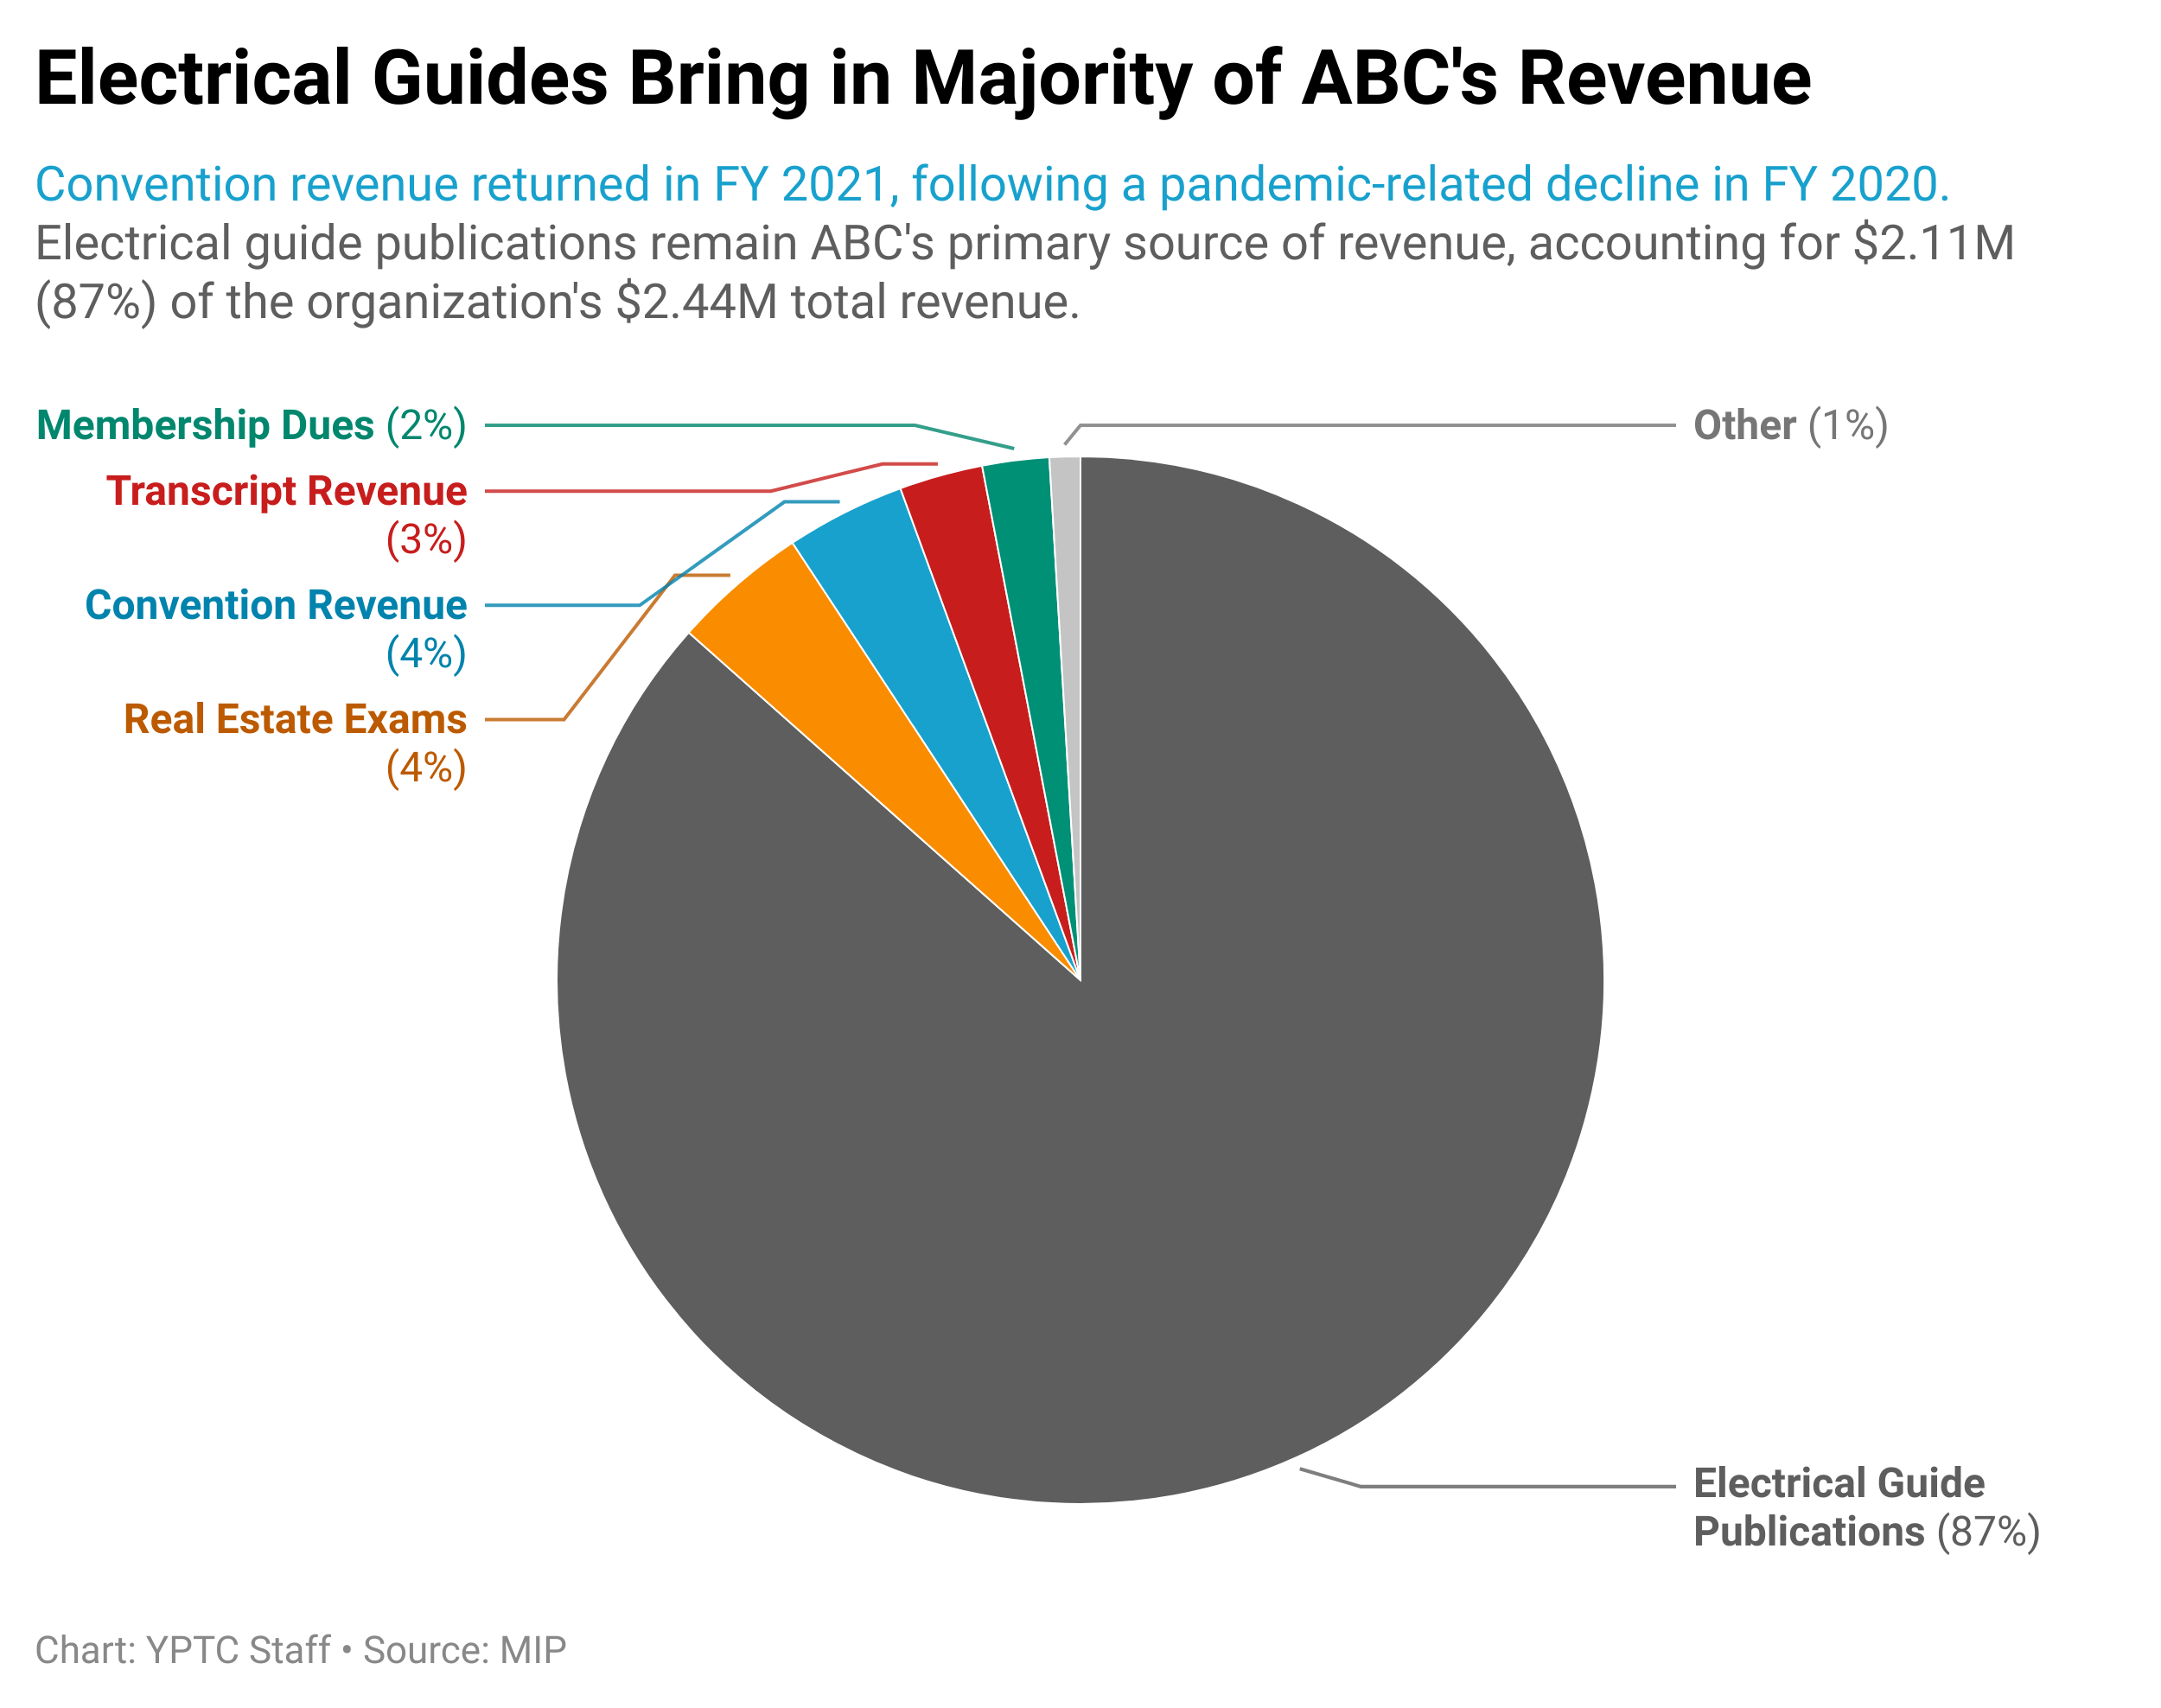 WnMSR-electrical-guides-bring-in-majority-of-abc-s-revenue